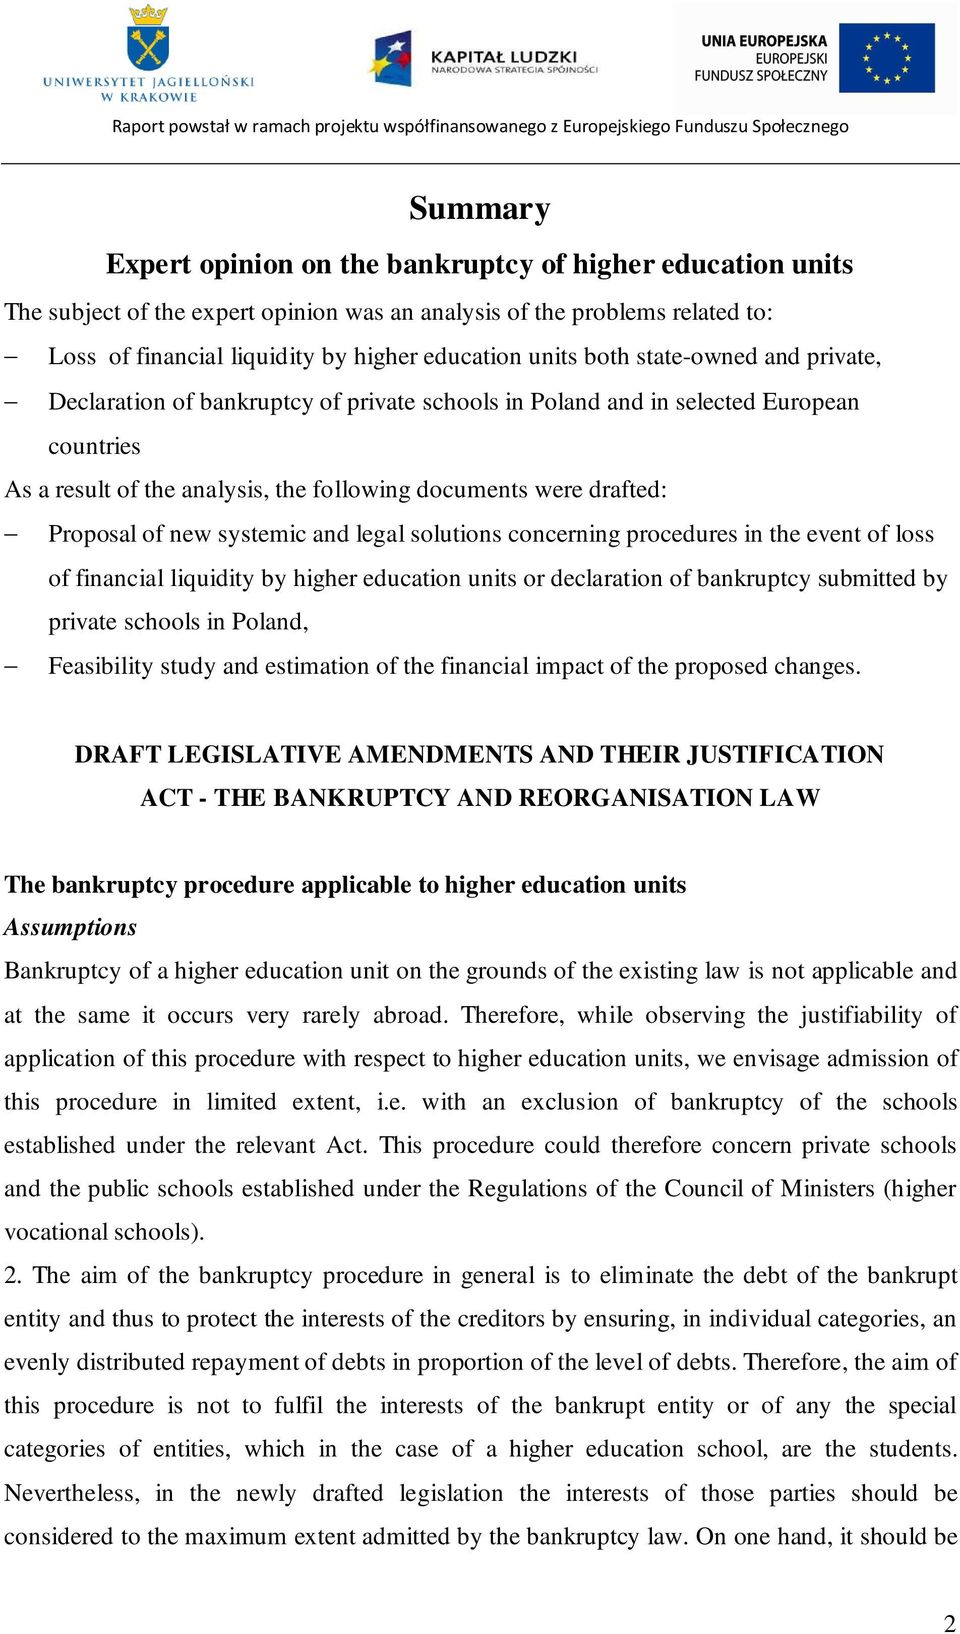 new systemic and legal solutions concerning procedures in the event of loss of financial liquidity by higher education units or declaration of bankruptcy submitted by private schools in Poland,